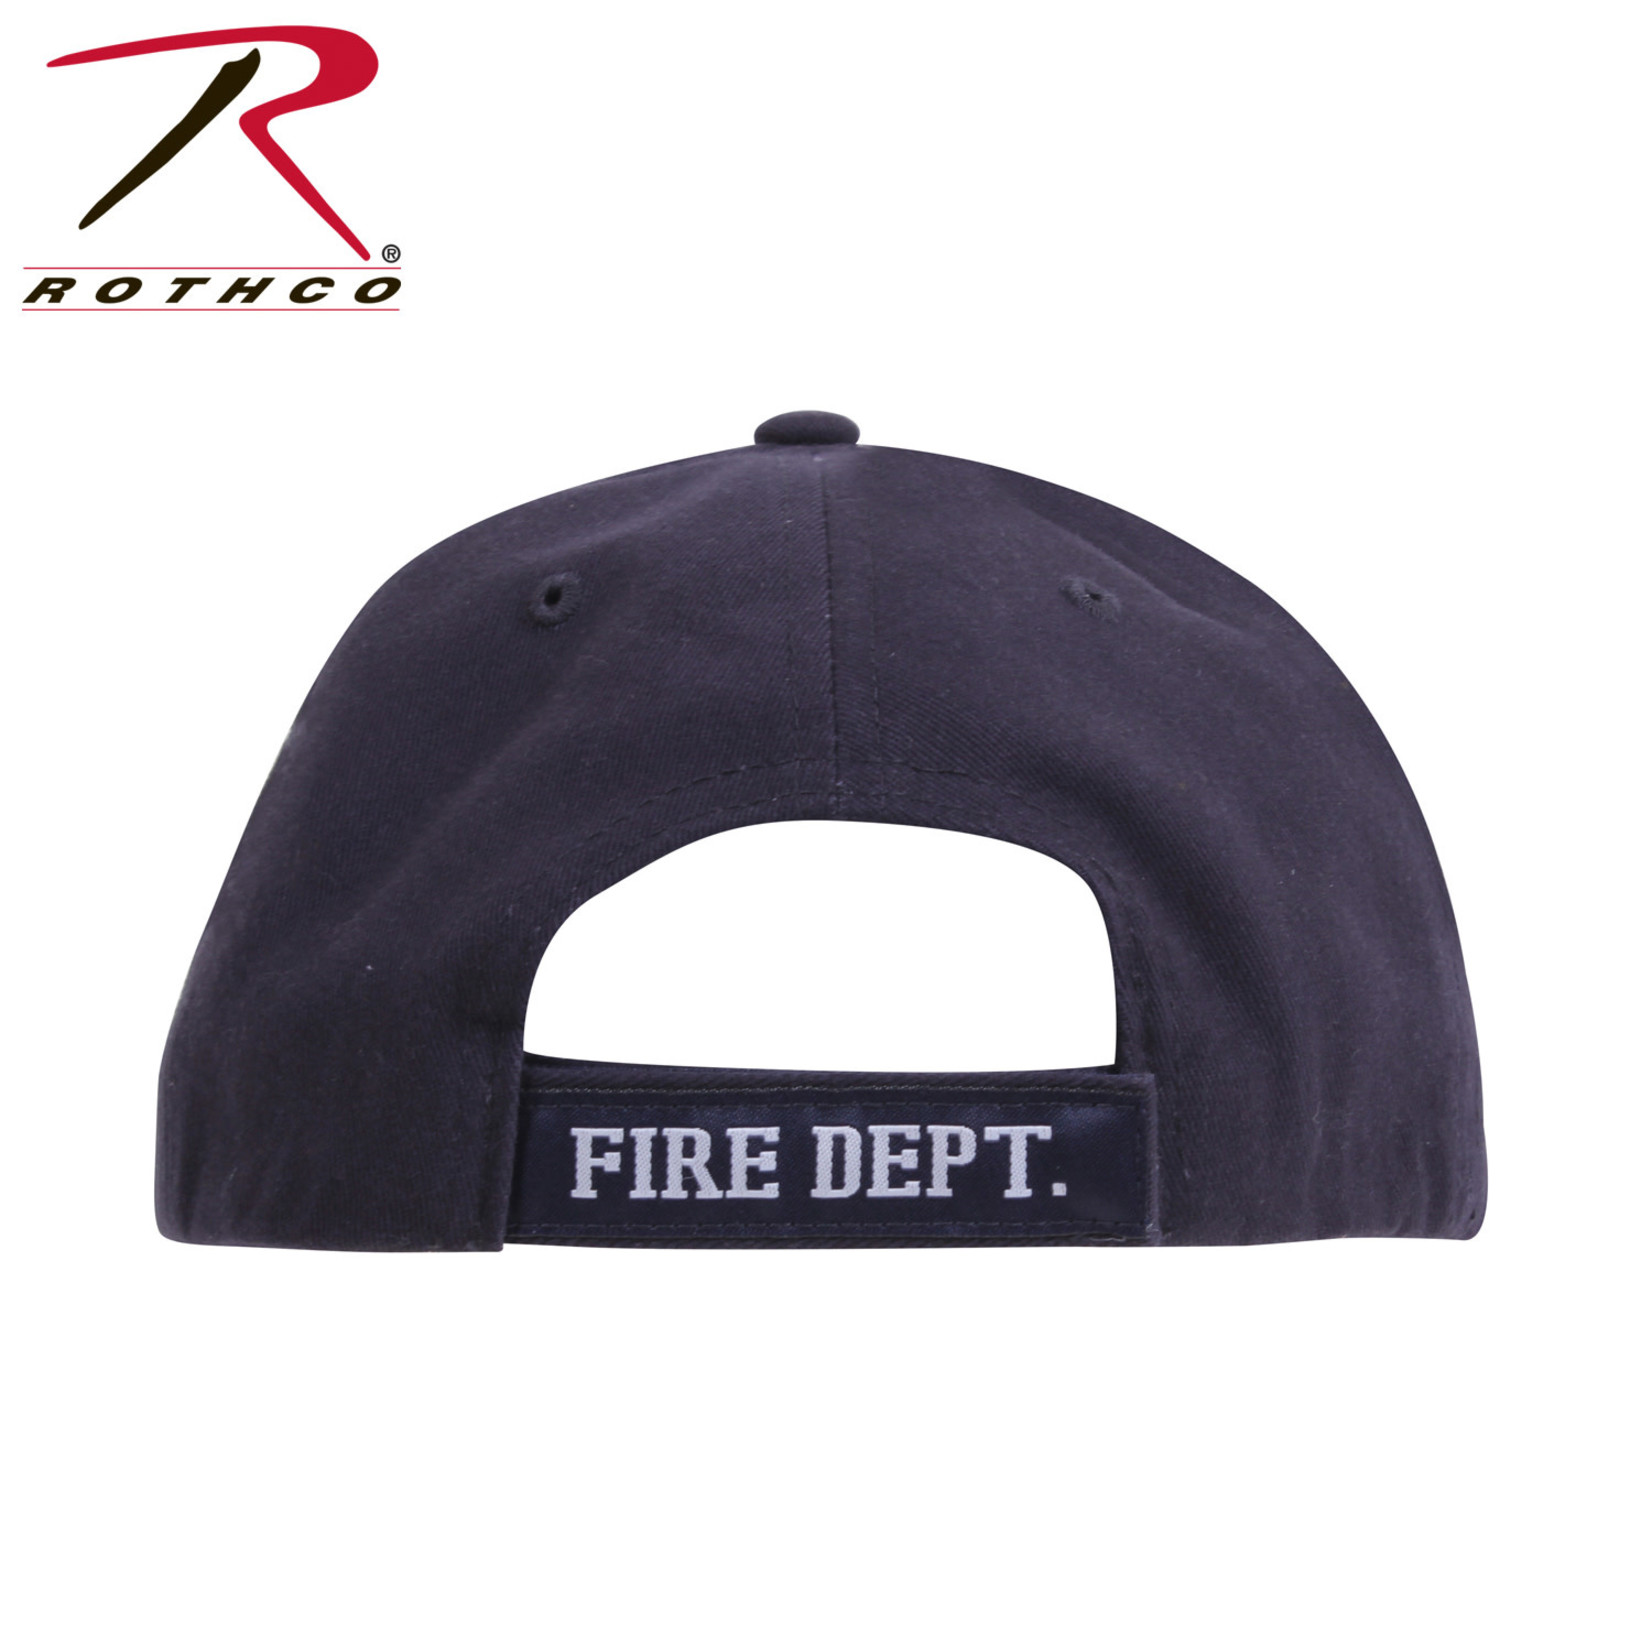 Rothco Rothco Fire Dept. Low Profile Cap - Navy Blue